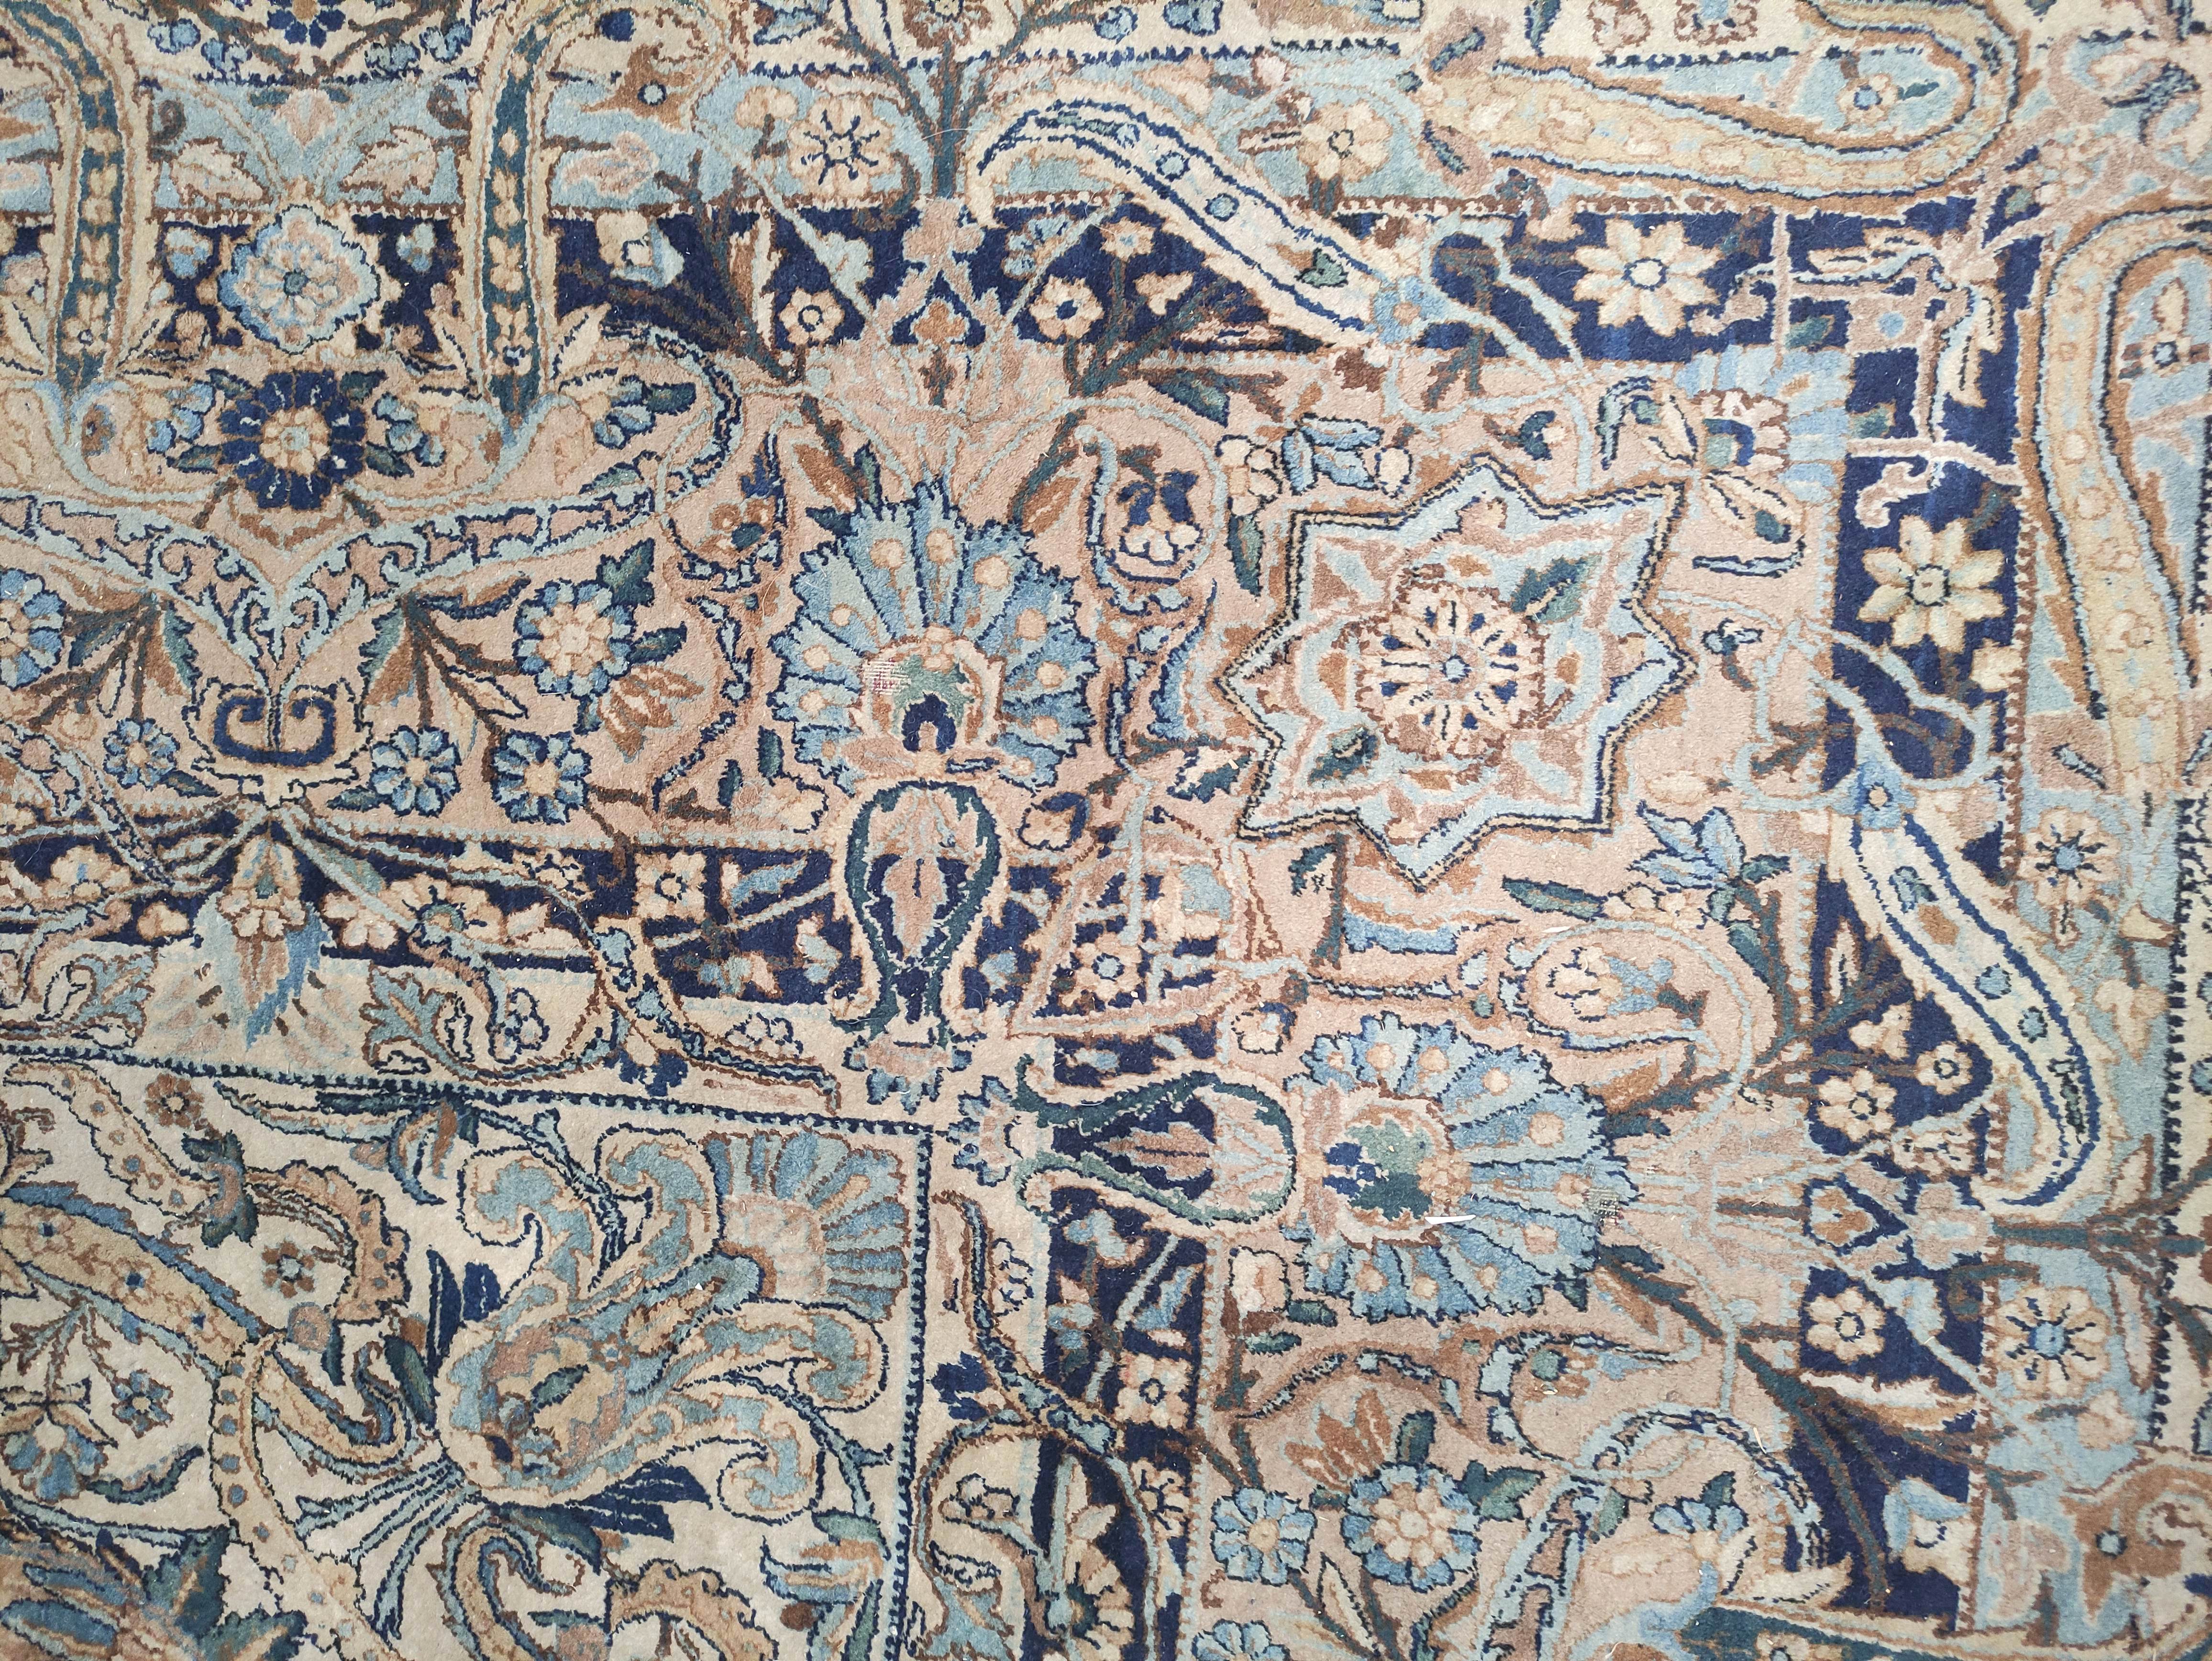 Fine large Persian Kirman carpet with overall foliate decoration of palmettes and other motifs - Image 4 of 5